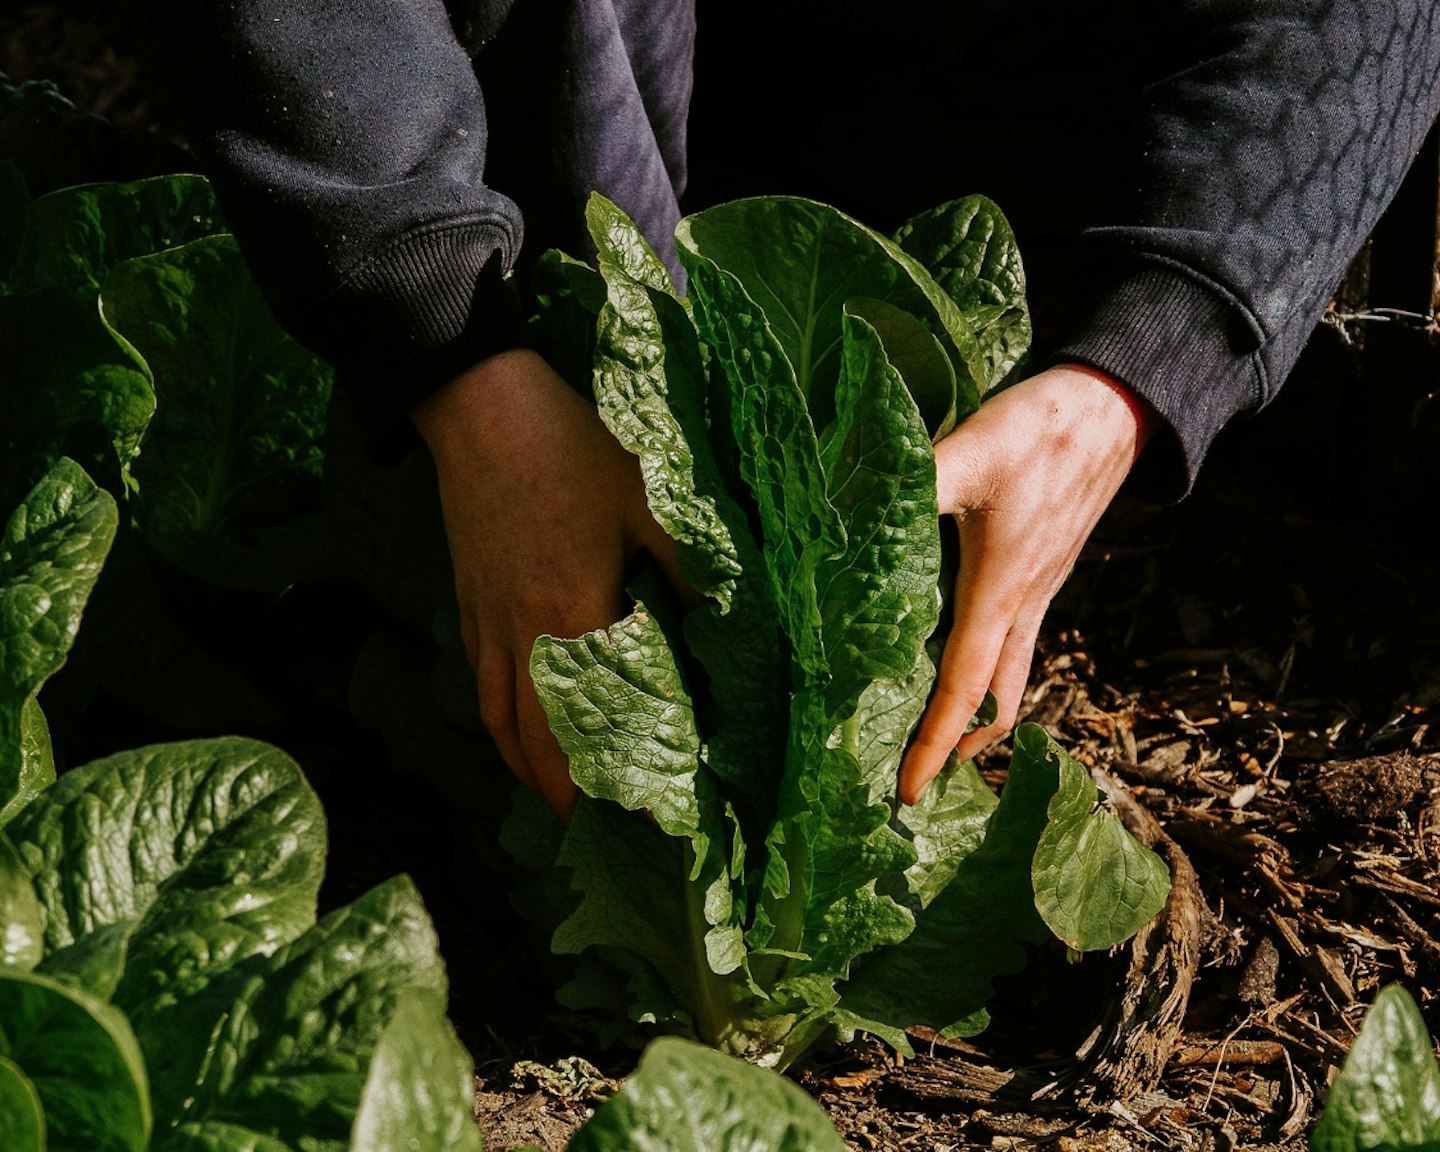 hands removing lettuce from the ground